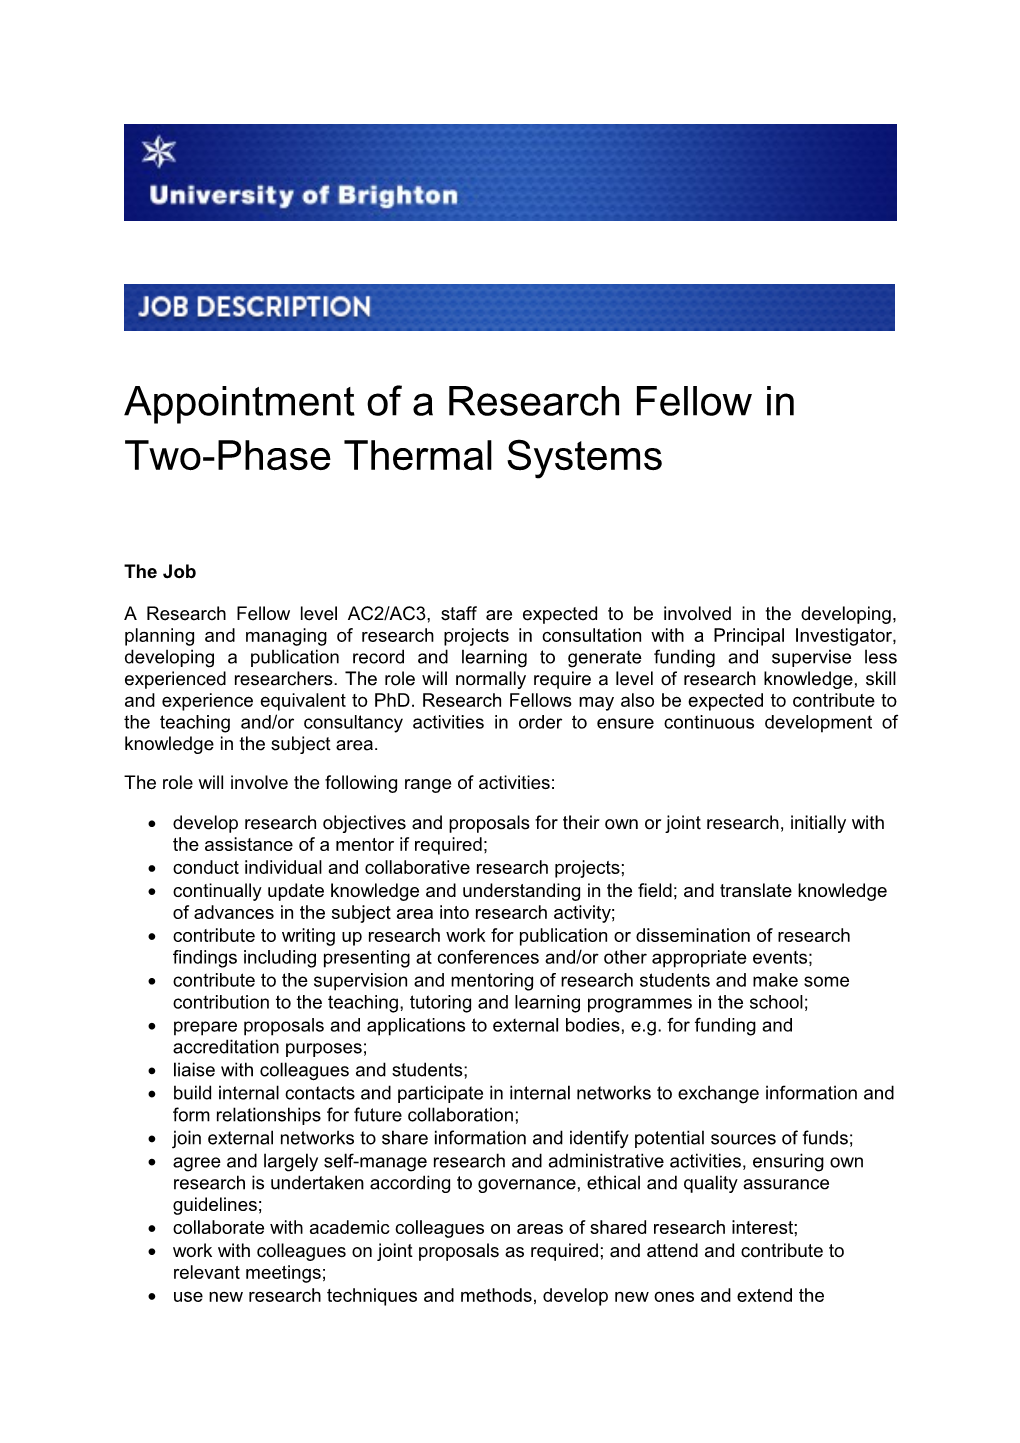 Appointment of a Research Fellow in Two-Phase Thermal Systems